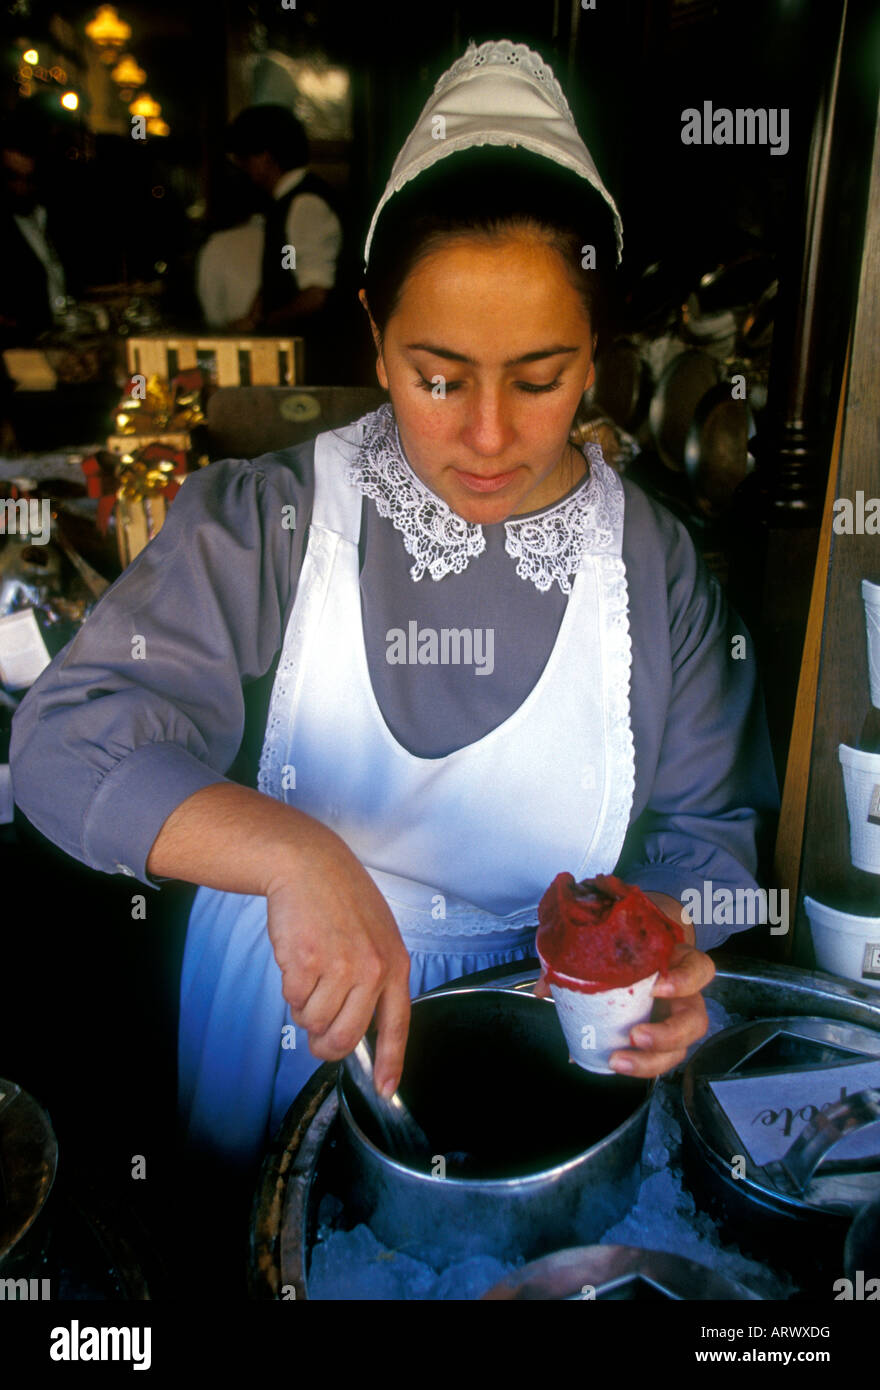 1, one, Mexican woman, young woman, server, cup frozen sorbet, ice cream parlor, candy store, city of Morelia, Morelia, Michoacan State, Mexico Stock Photo